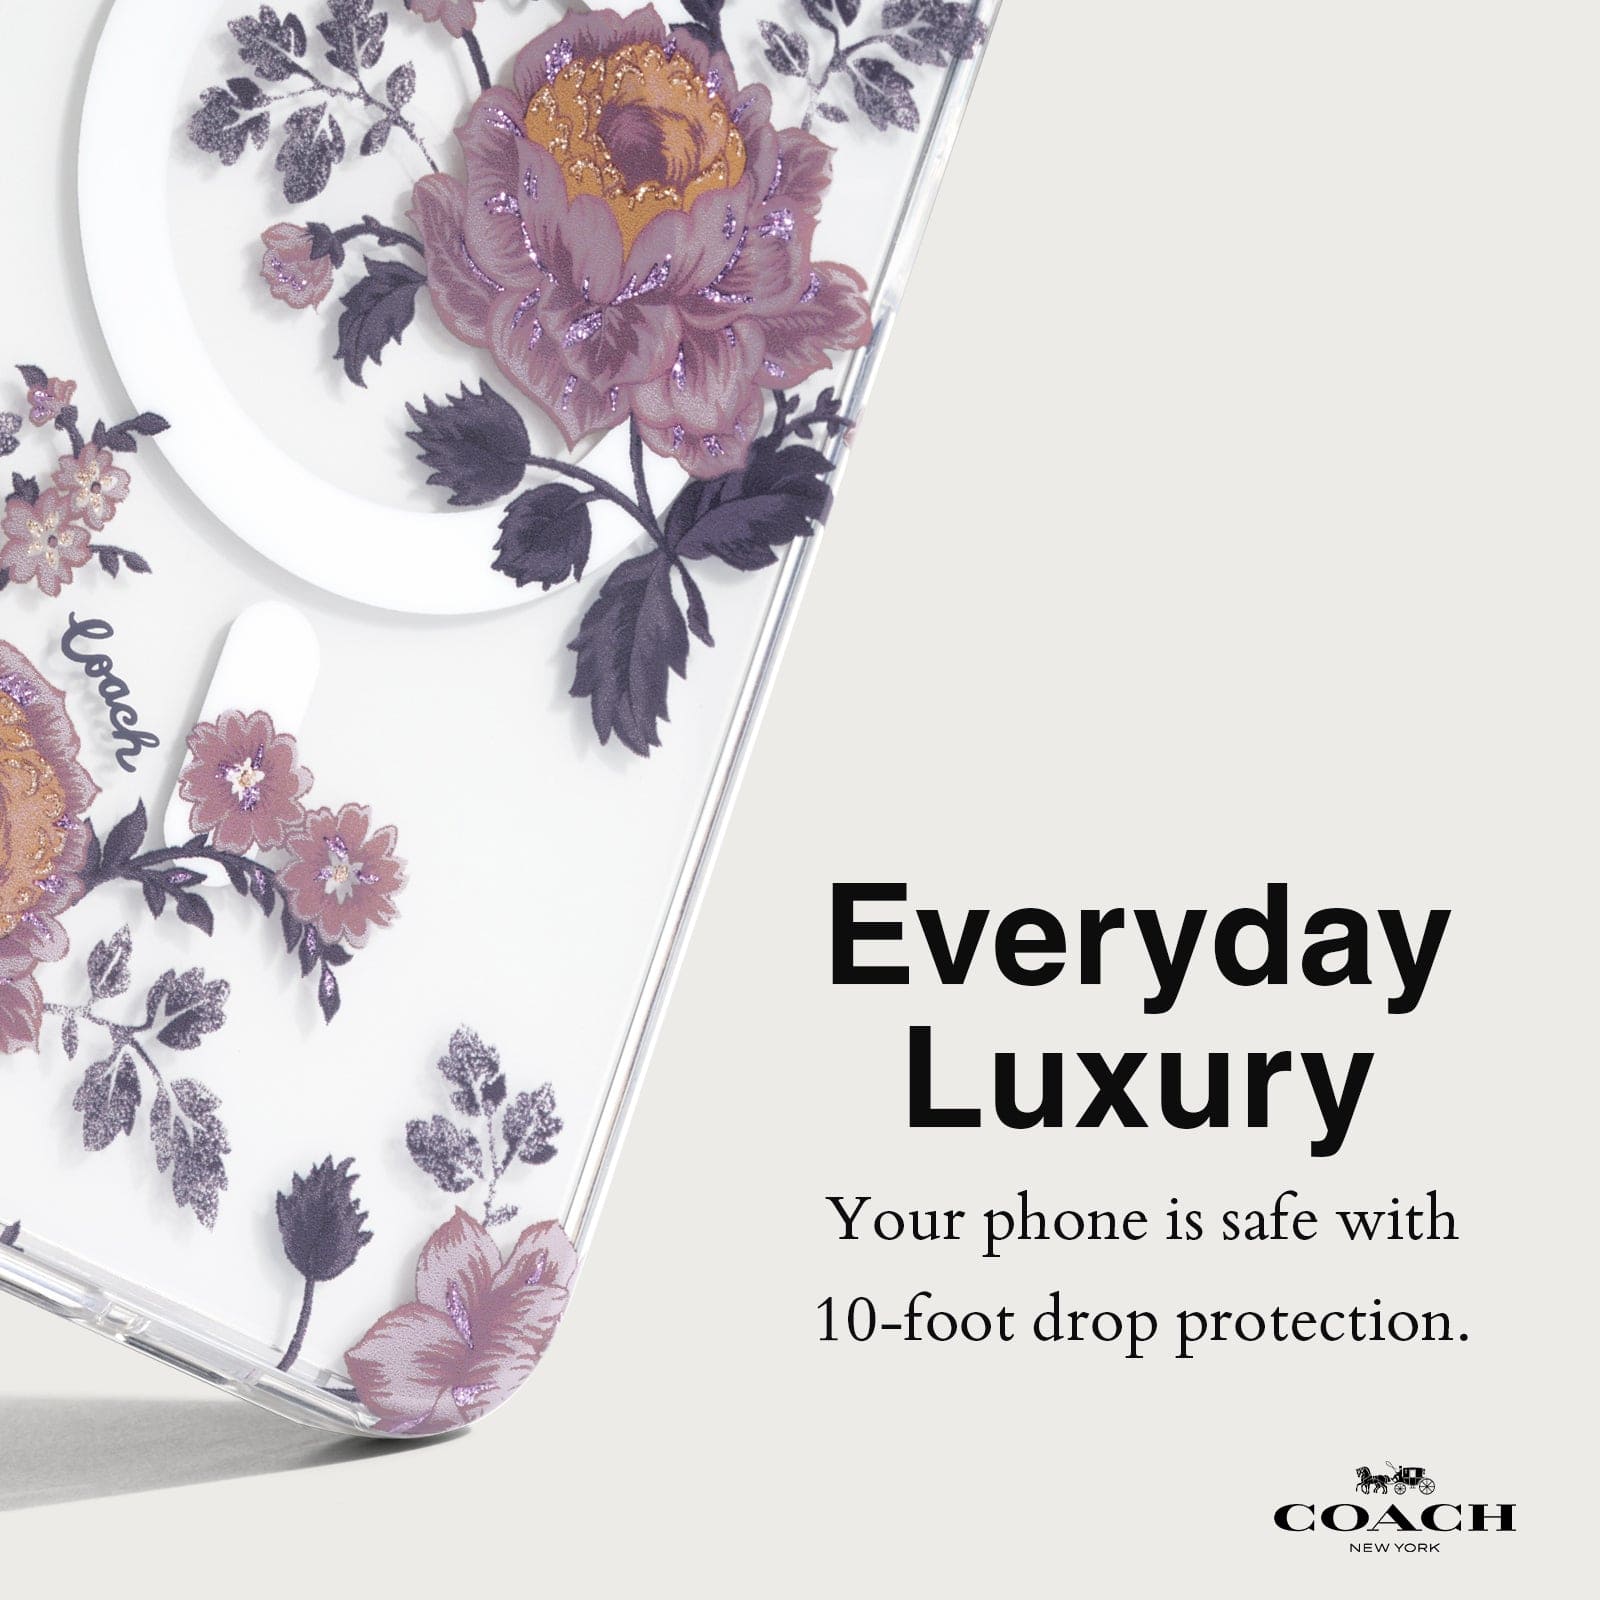 EVERDAY LUXURY. YOUR PHONE IS SAFE WITH 10-FOOT DROP PROTECTION